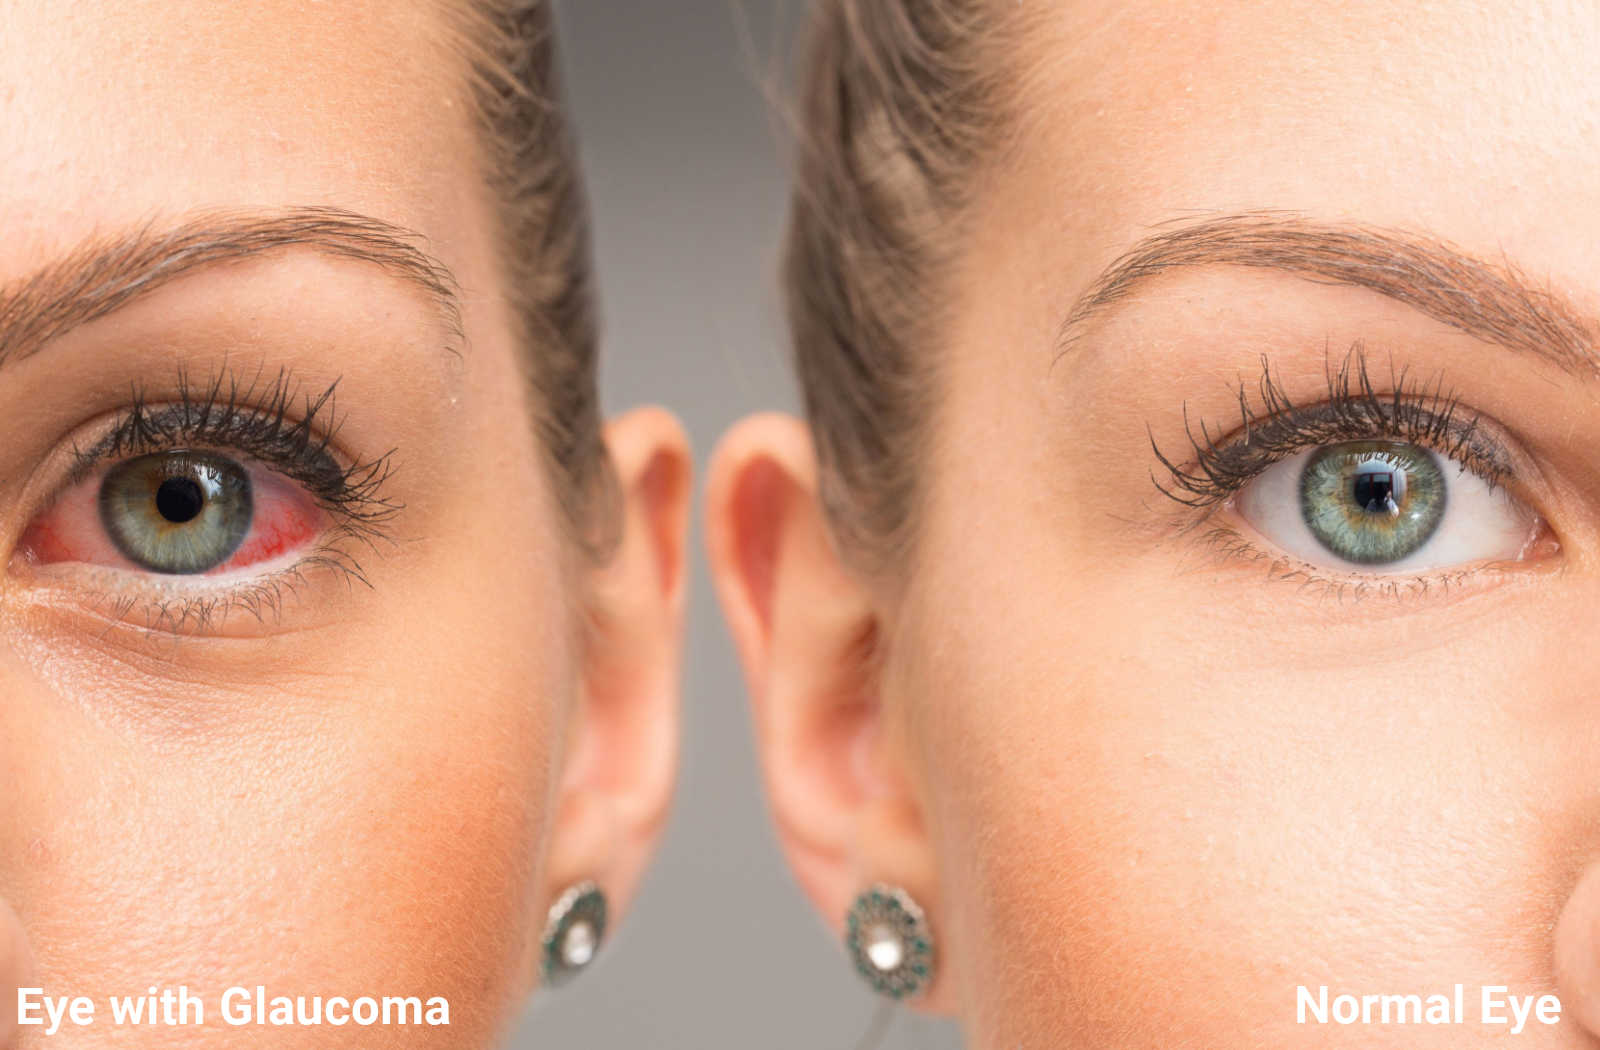 A comparison of a female with normal eye against eye with glaucoma.